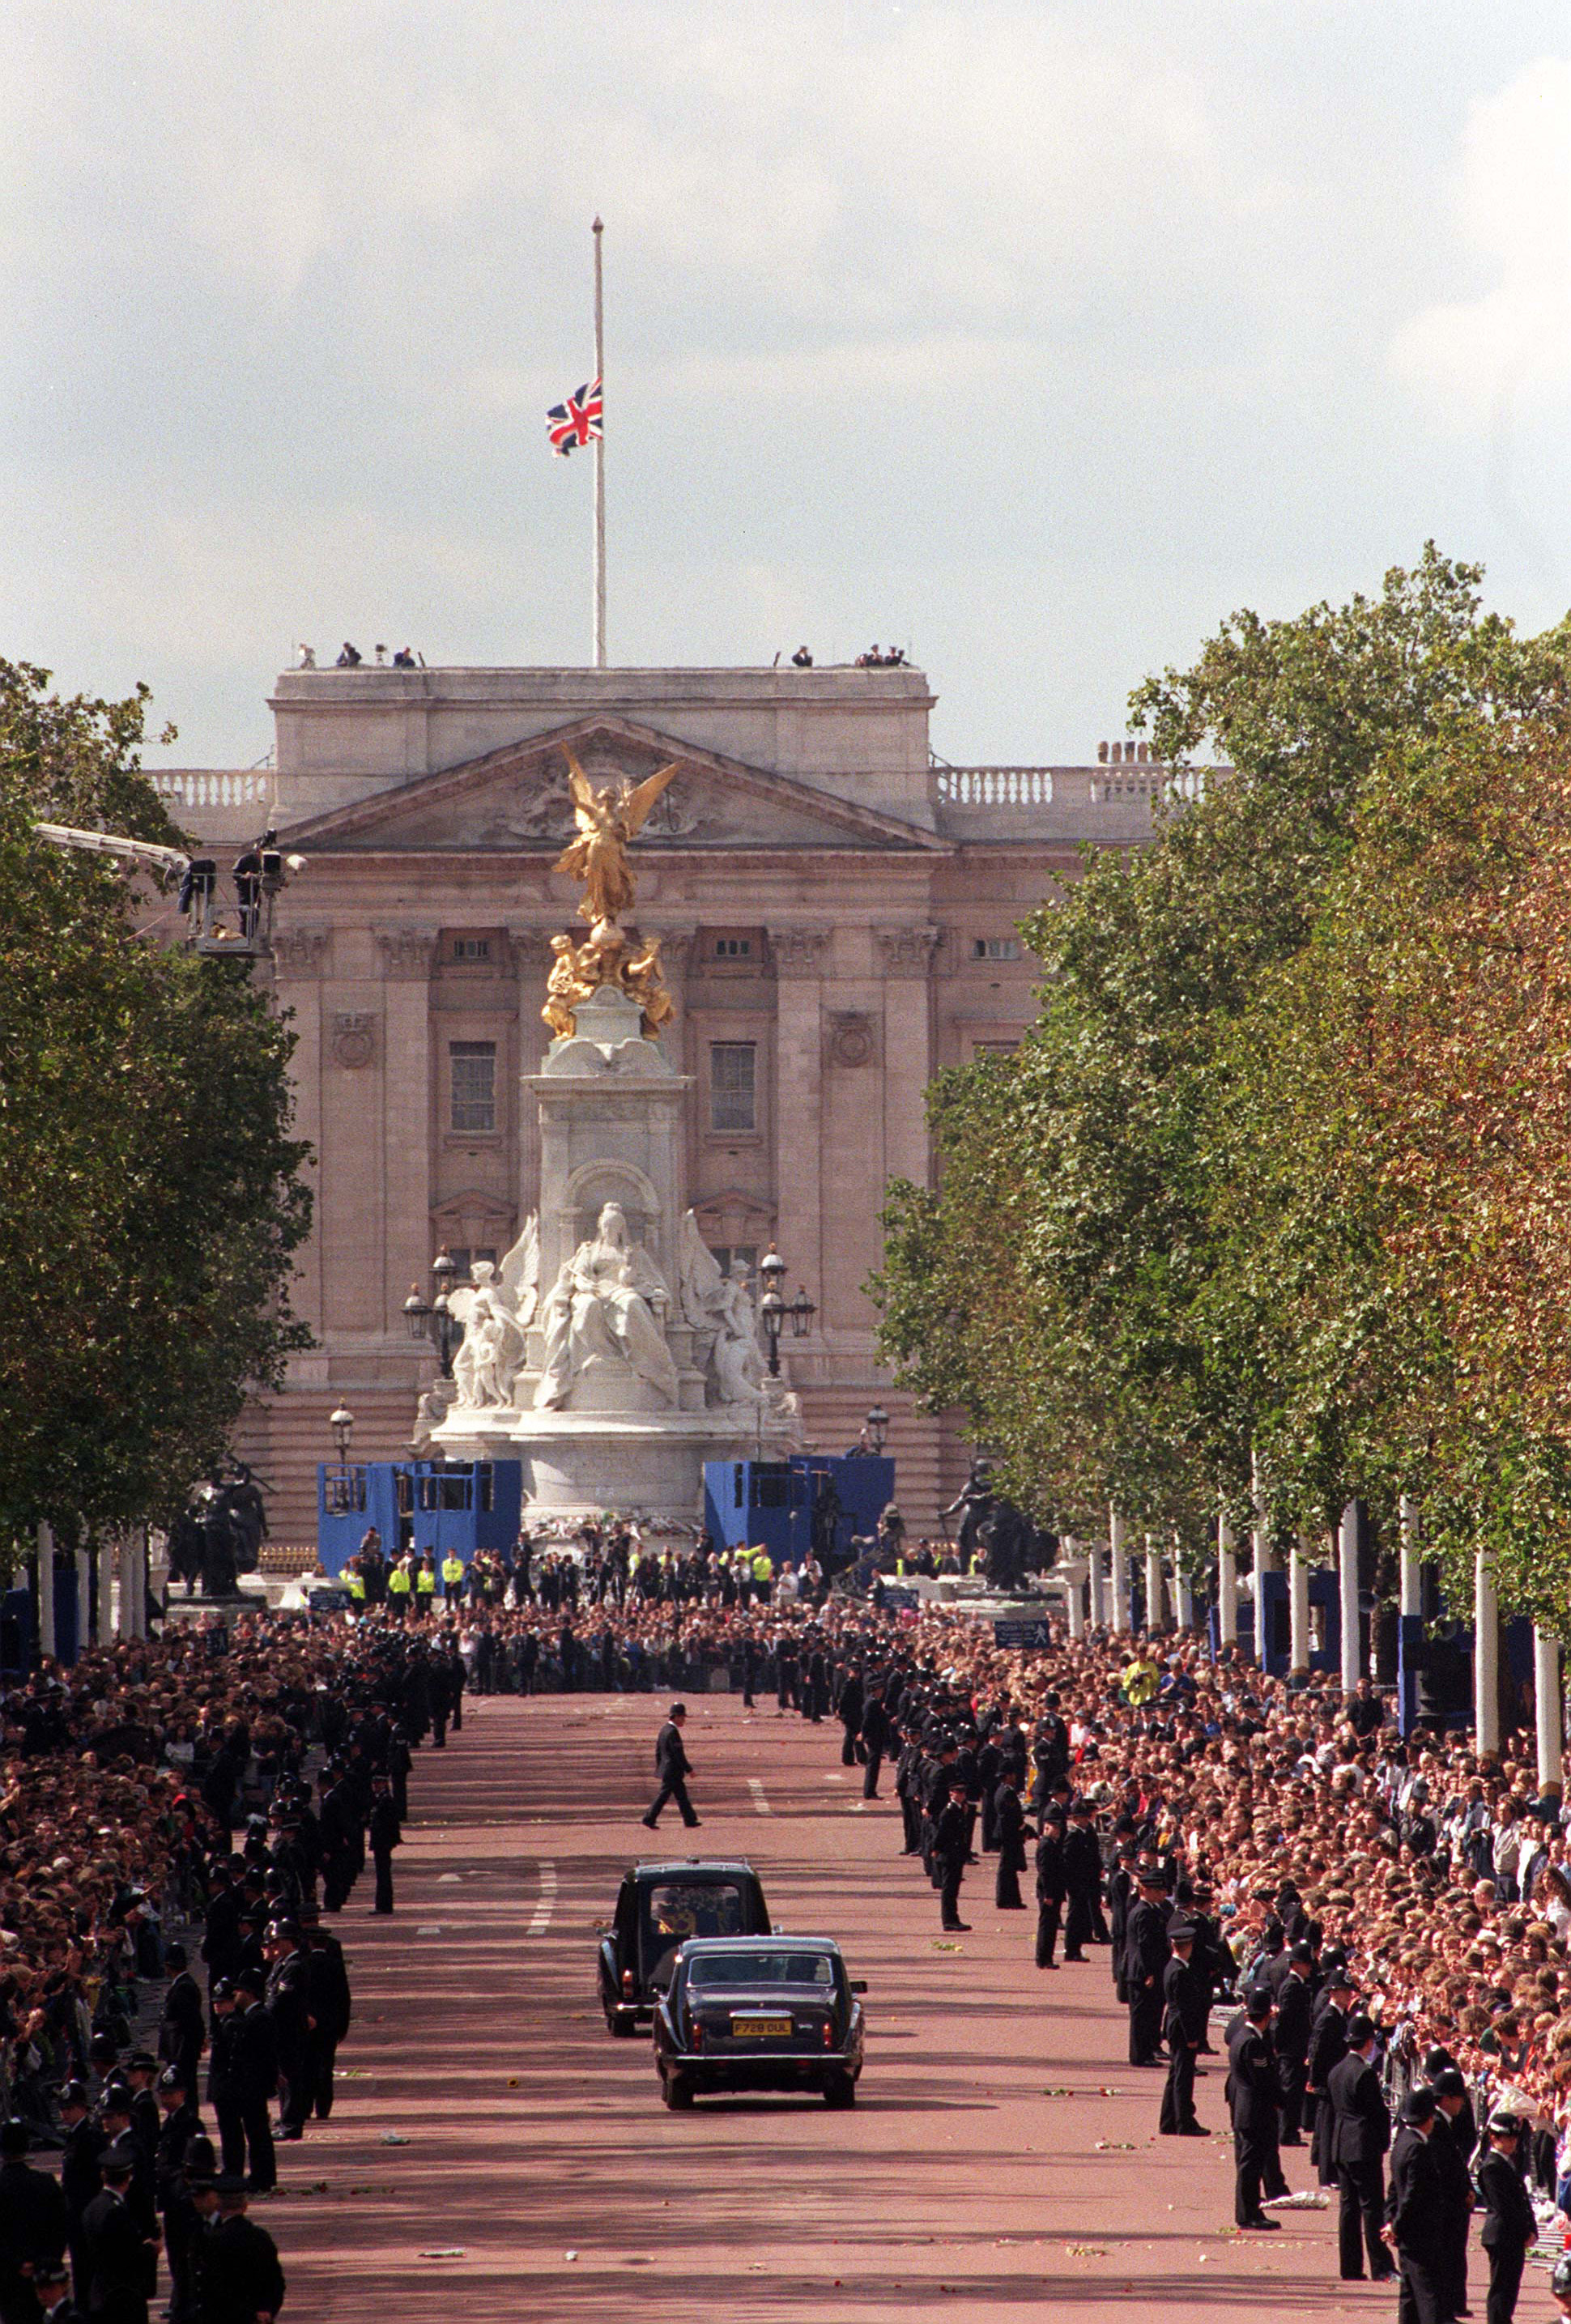 <p>Police kept enormous crowds of mourners back from the road as the hearse carrying the coffin of Diana, Princess of Wales drove down The Mall toward Buckingham Palace in London following her funeral service at Westminster Abbey on Sept. 6, 1997, on its way to her family estate, Althorp, where she was privately buried on a small island.</p>